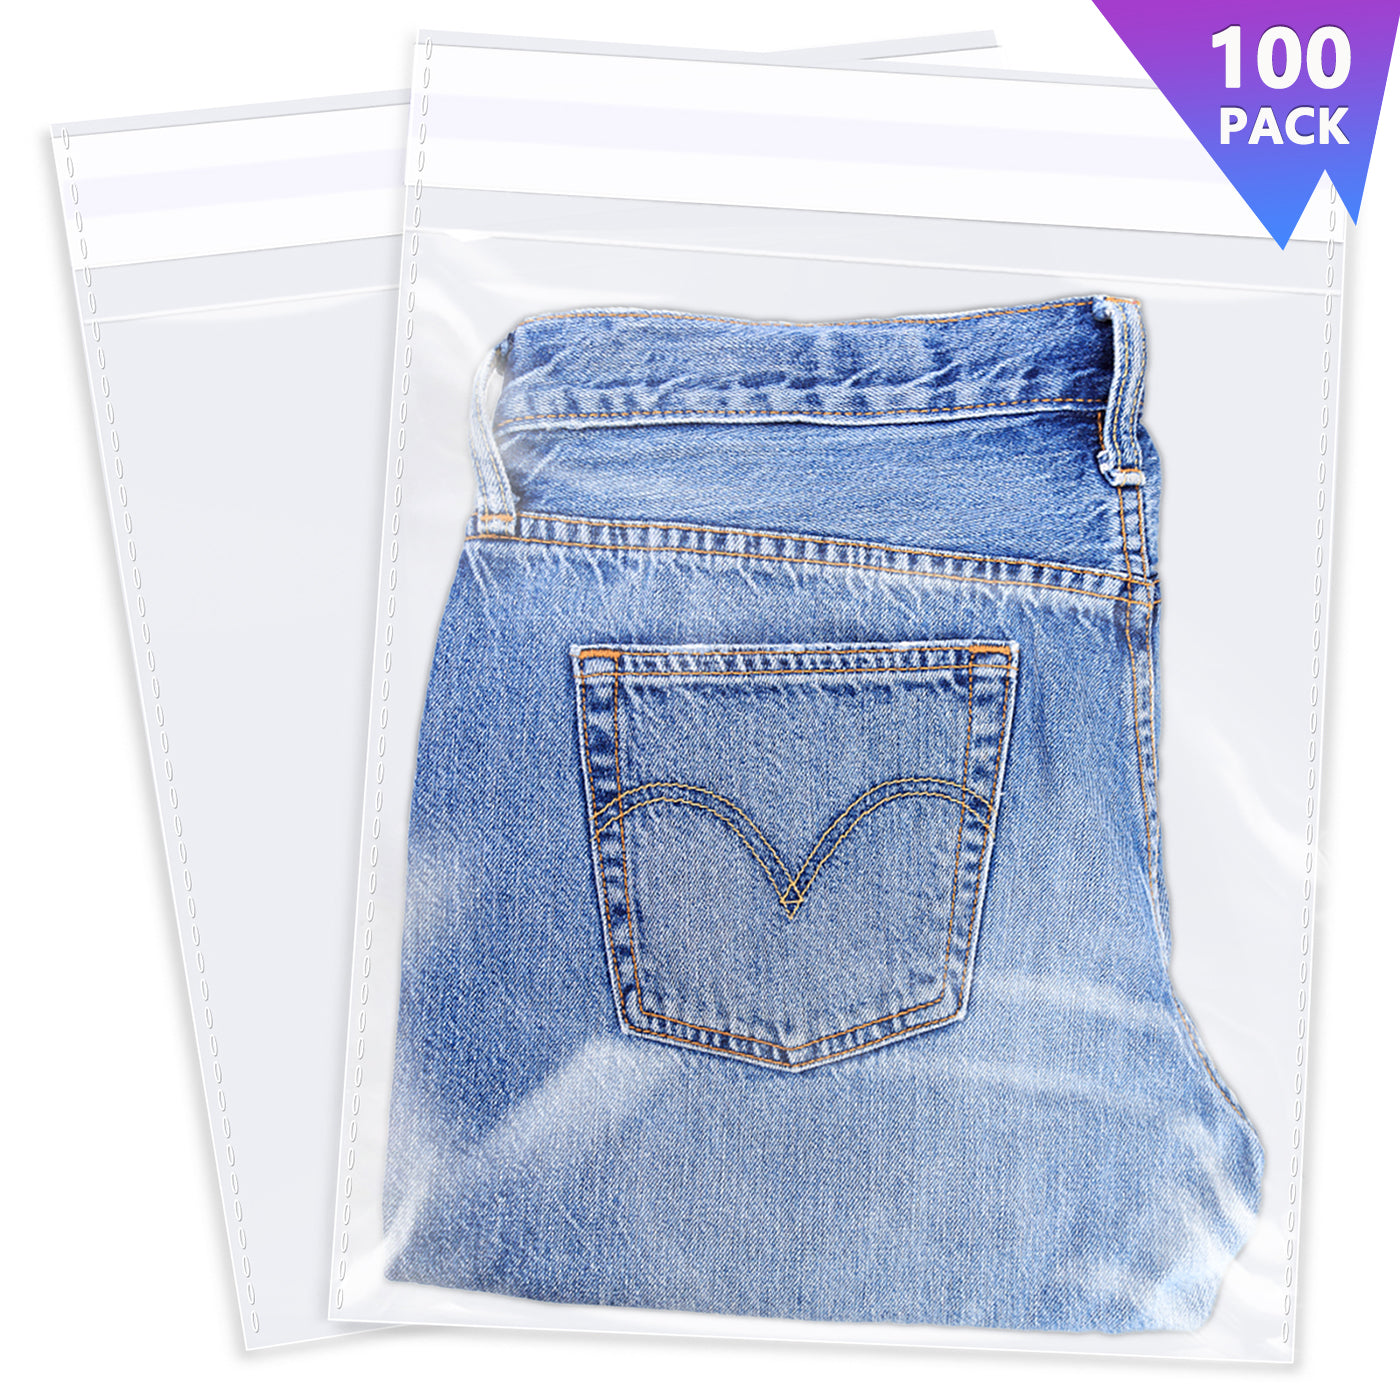 12" x 15" Clear Plastic Cellophane Bags Resealable Plastic Poly Bags